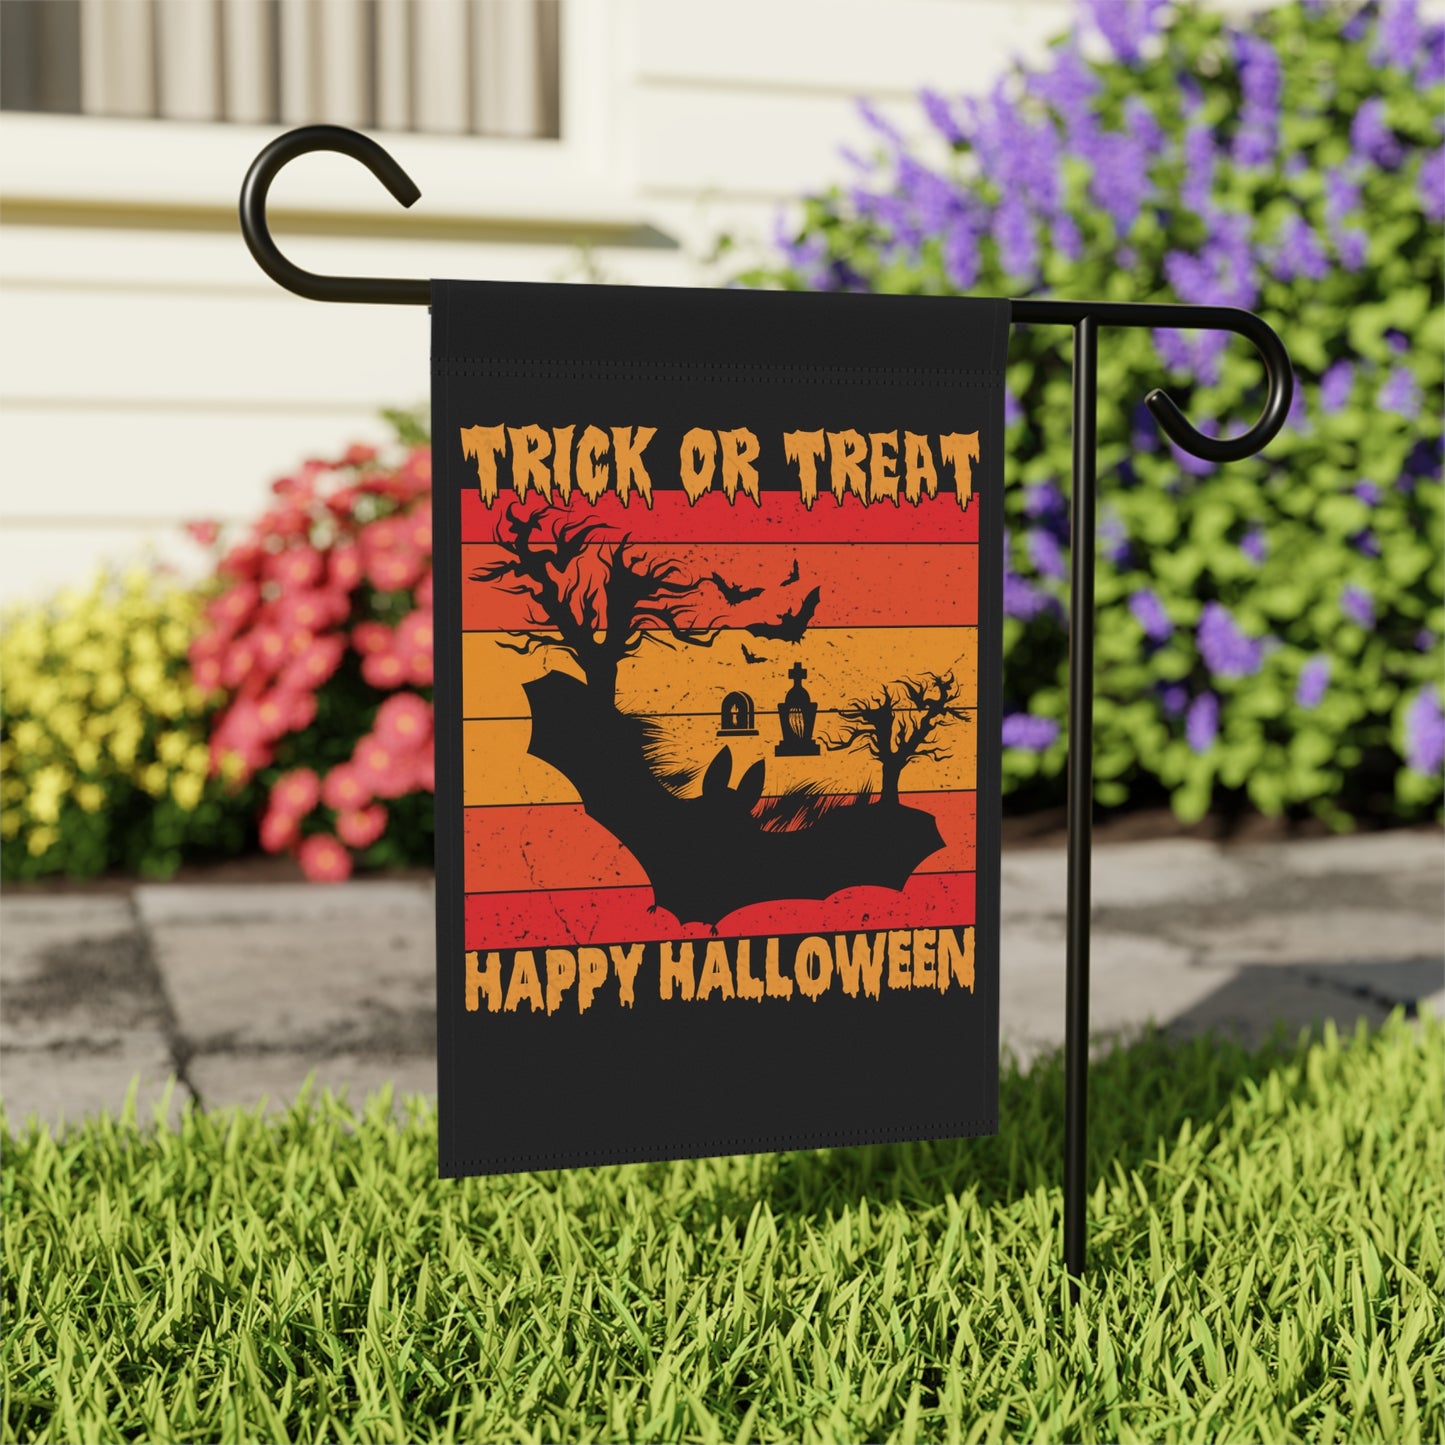 Trick or Treat Happy Halloween Party Banner To Let the Goblins Know Where It's At.